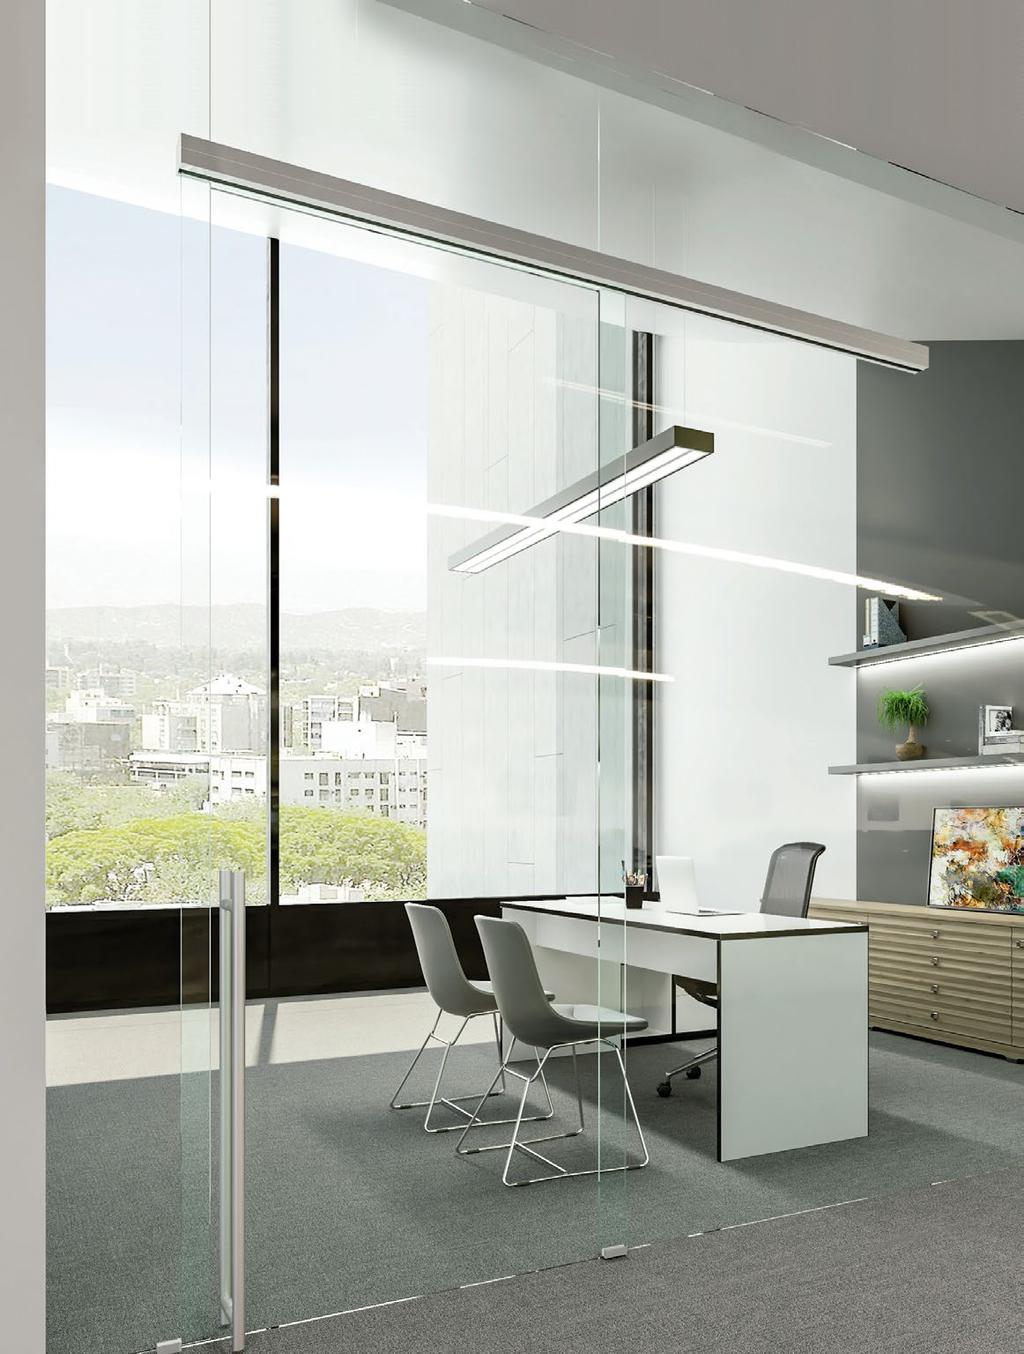 Sliding doors with soft closing system